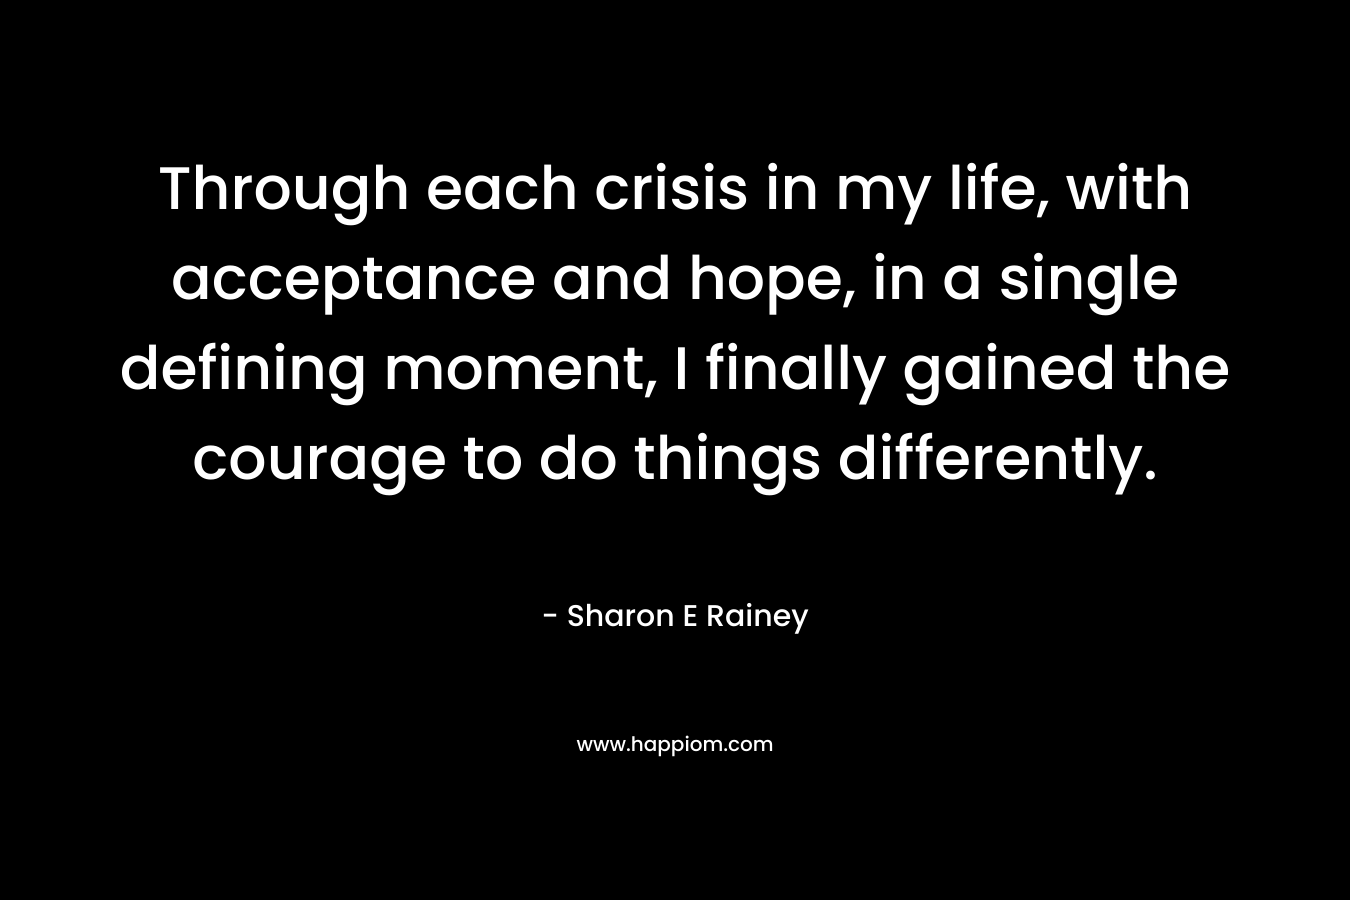 Through each crisis in my life, with acceptance and hope, in a single defining moment, I finally gained the courage to do things differently. – Sharon E Rainey